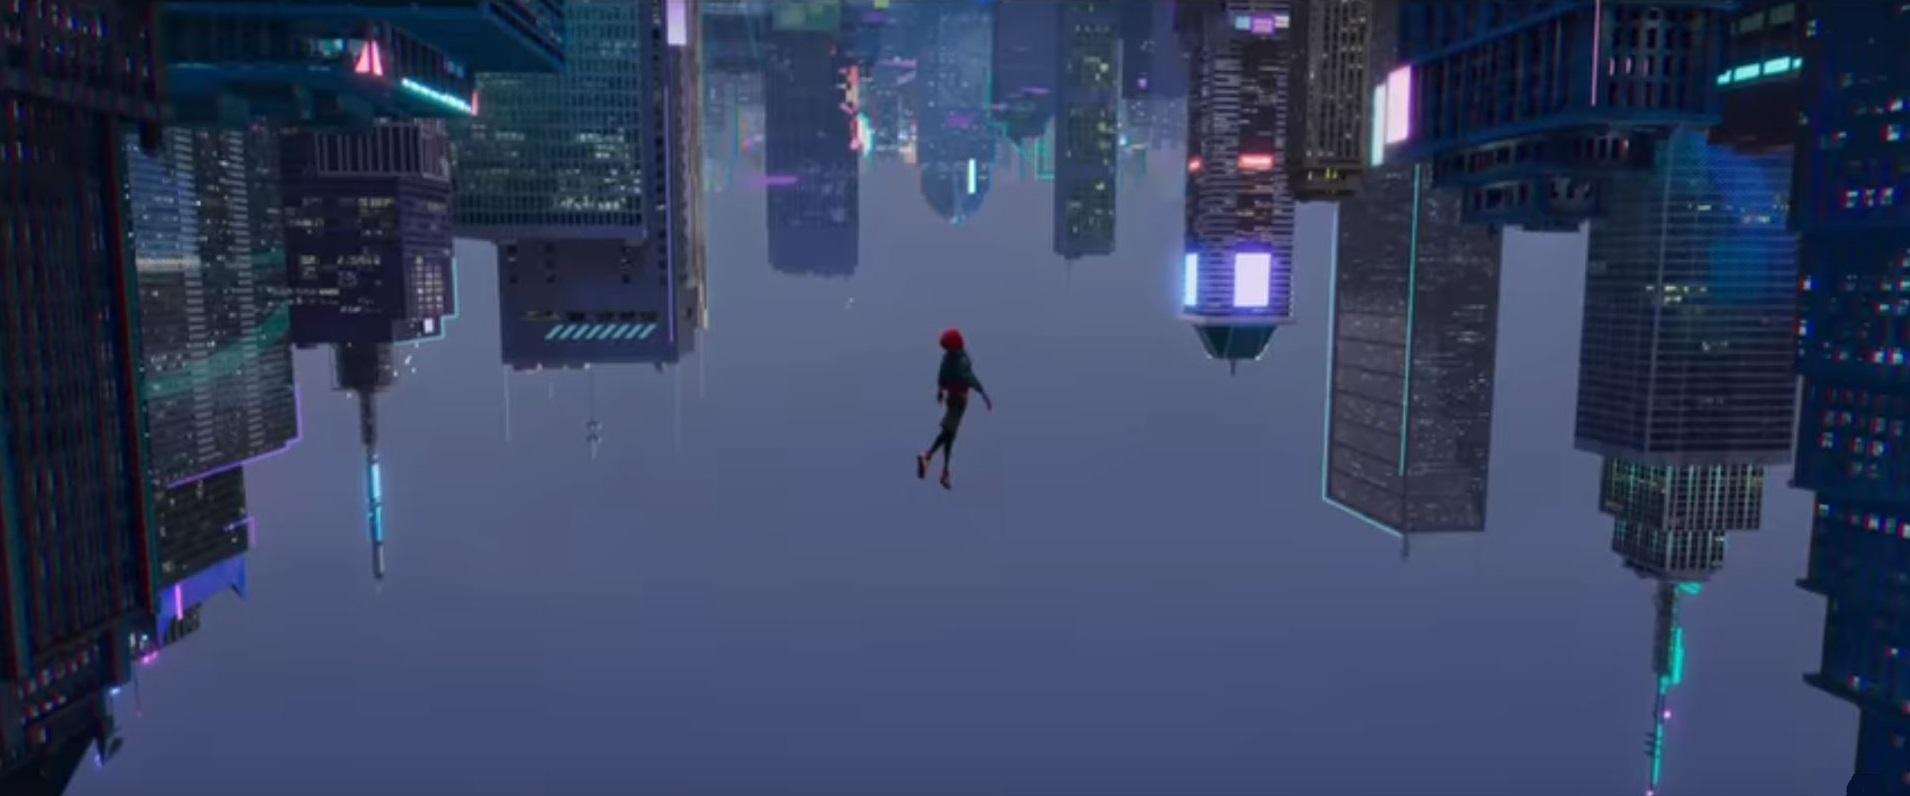 Spider Man: Into The Spiderverse Wallpaper I Threw Together. Please Enjoy. Sorry For Low Quality, It's A Temporary Job Until Someone Makes A Better One